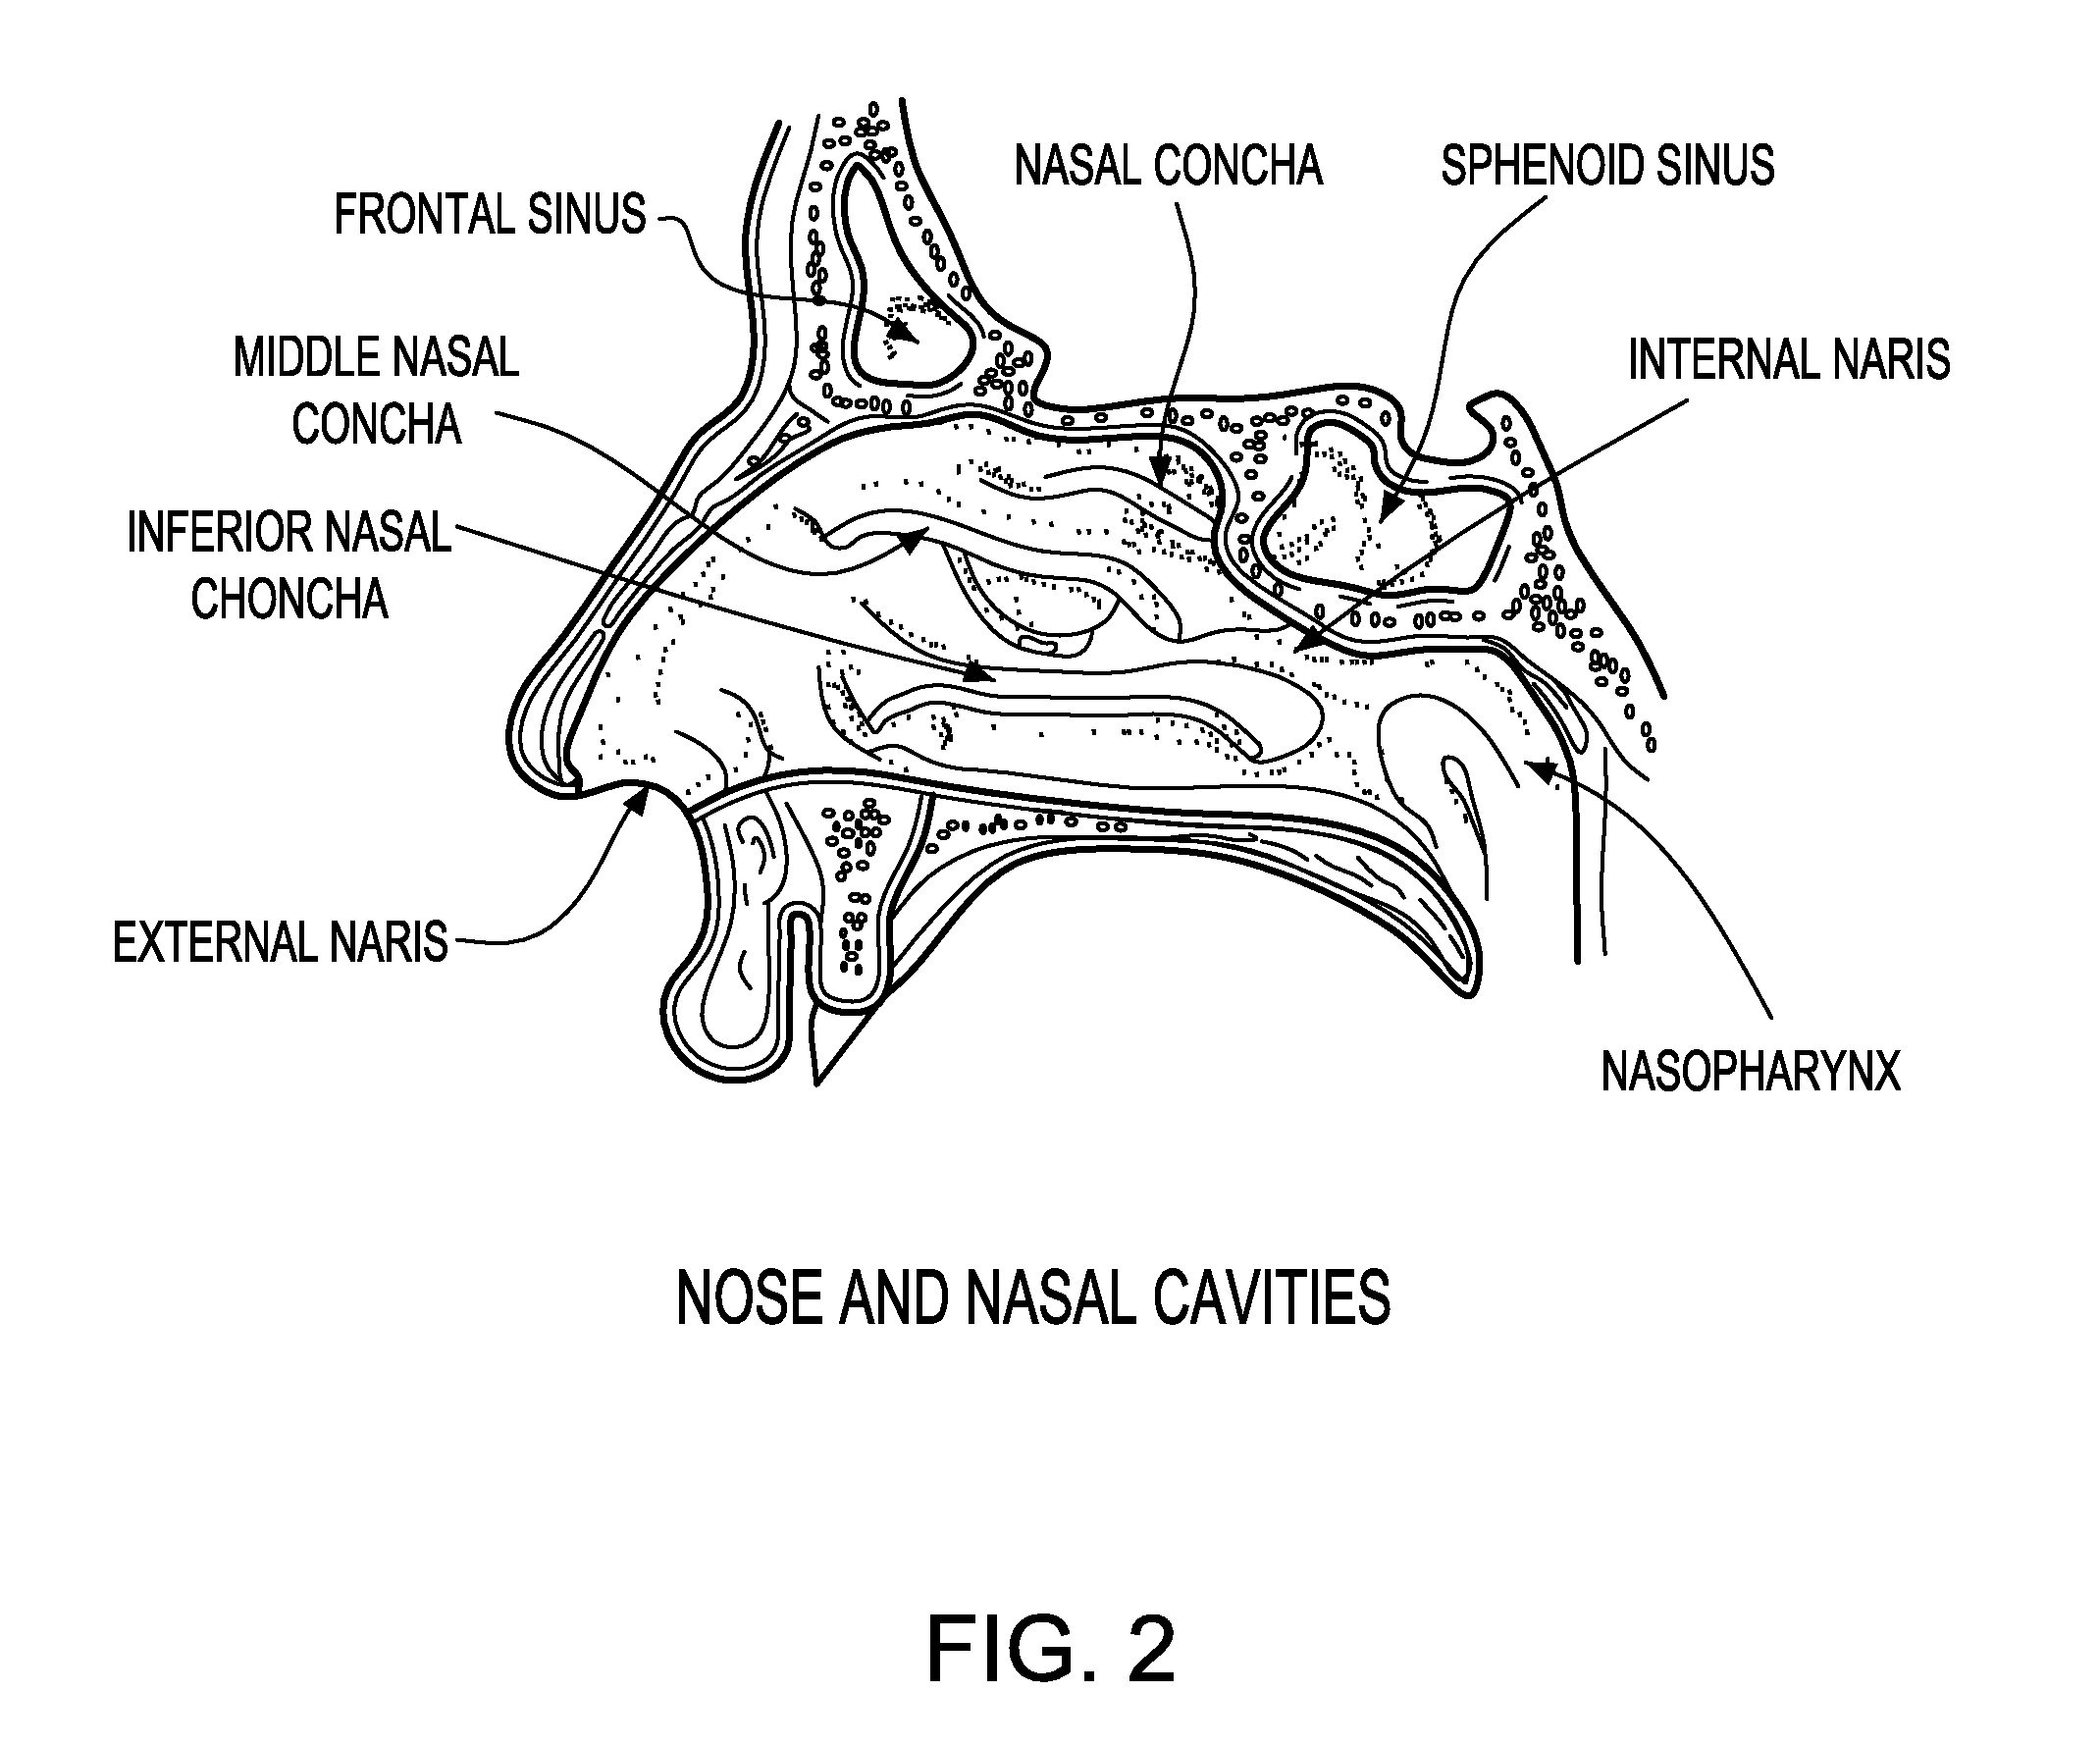 Methods for detecting antibodies in mucosal samples and device for sampling mucosal material